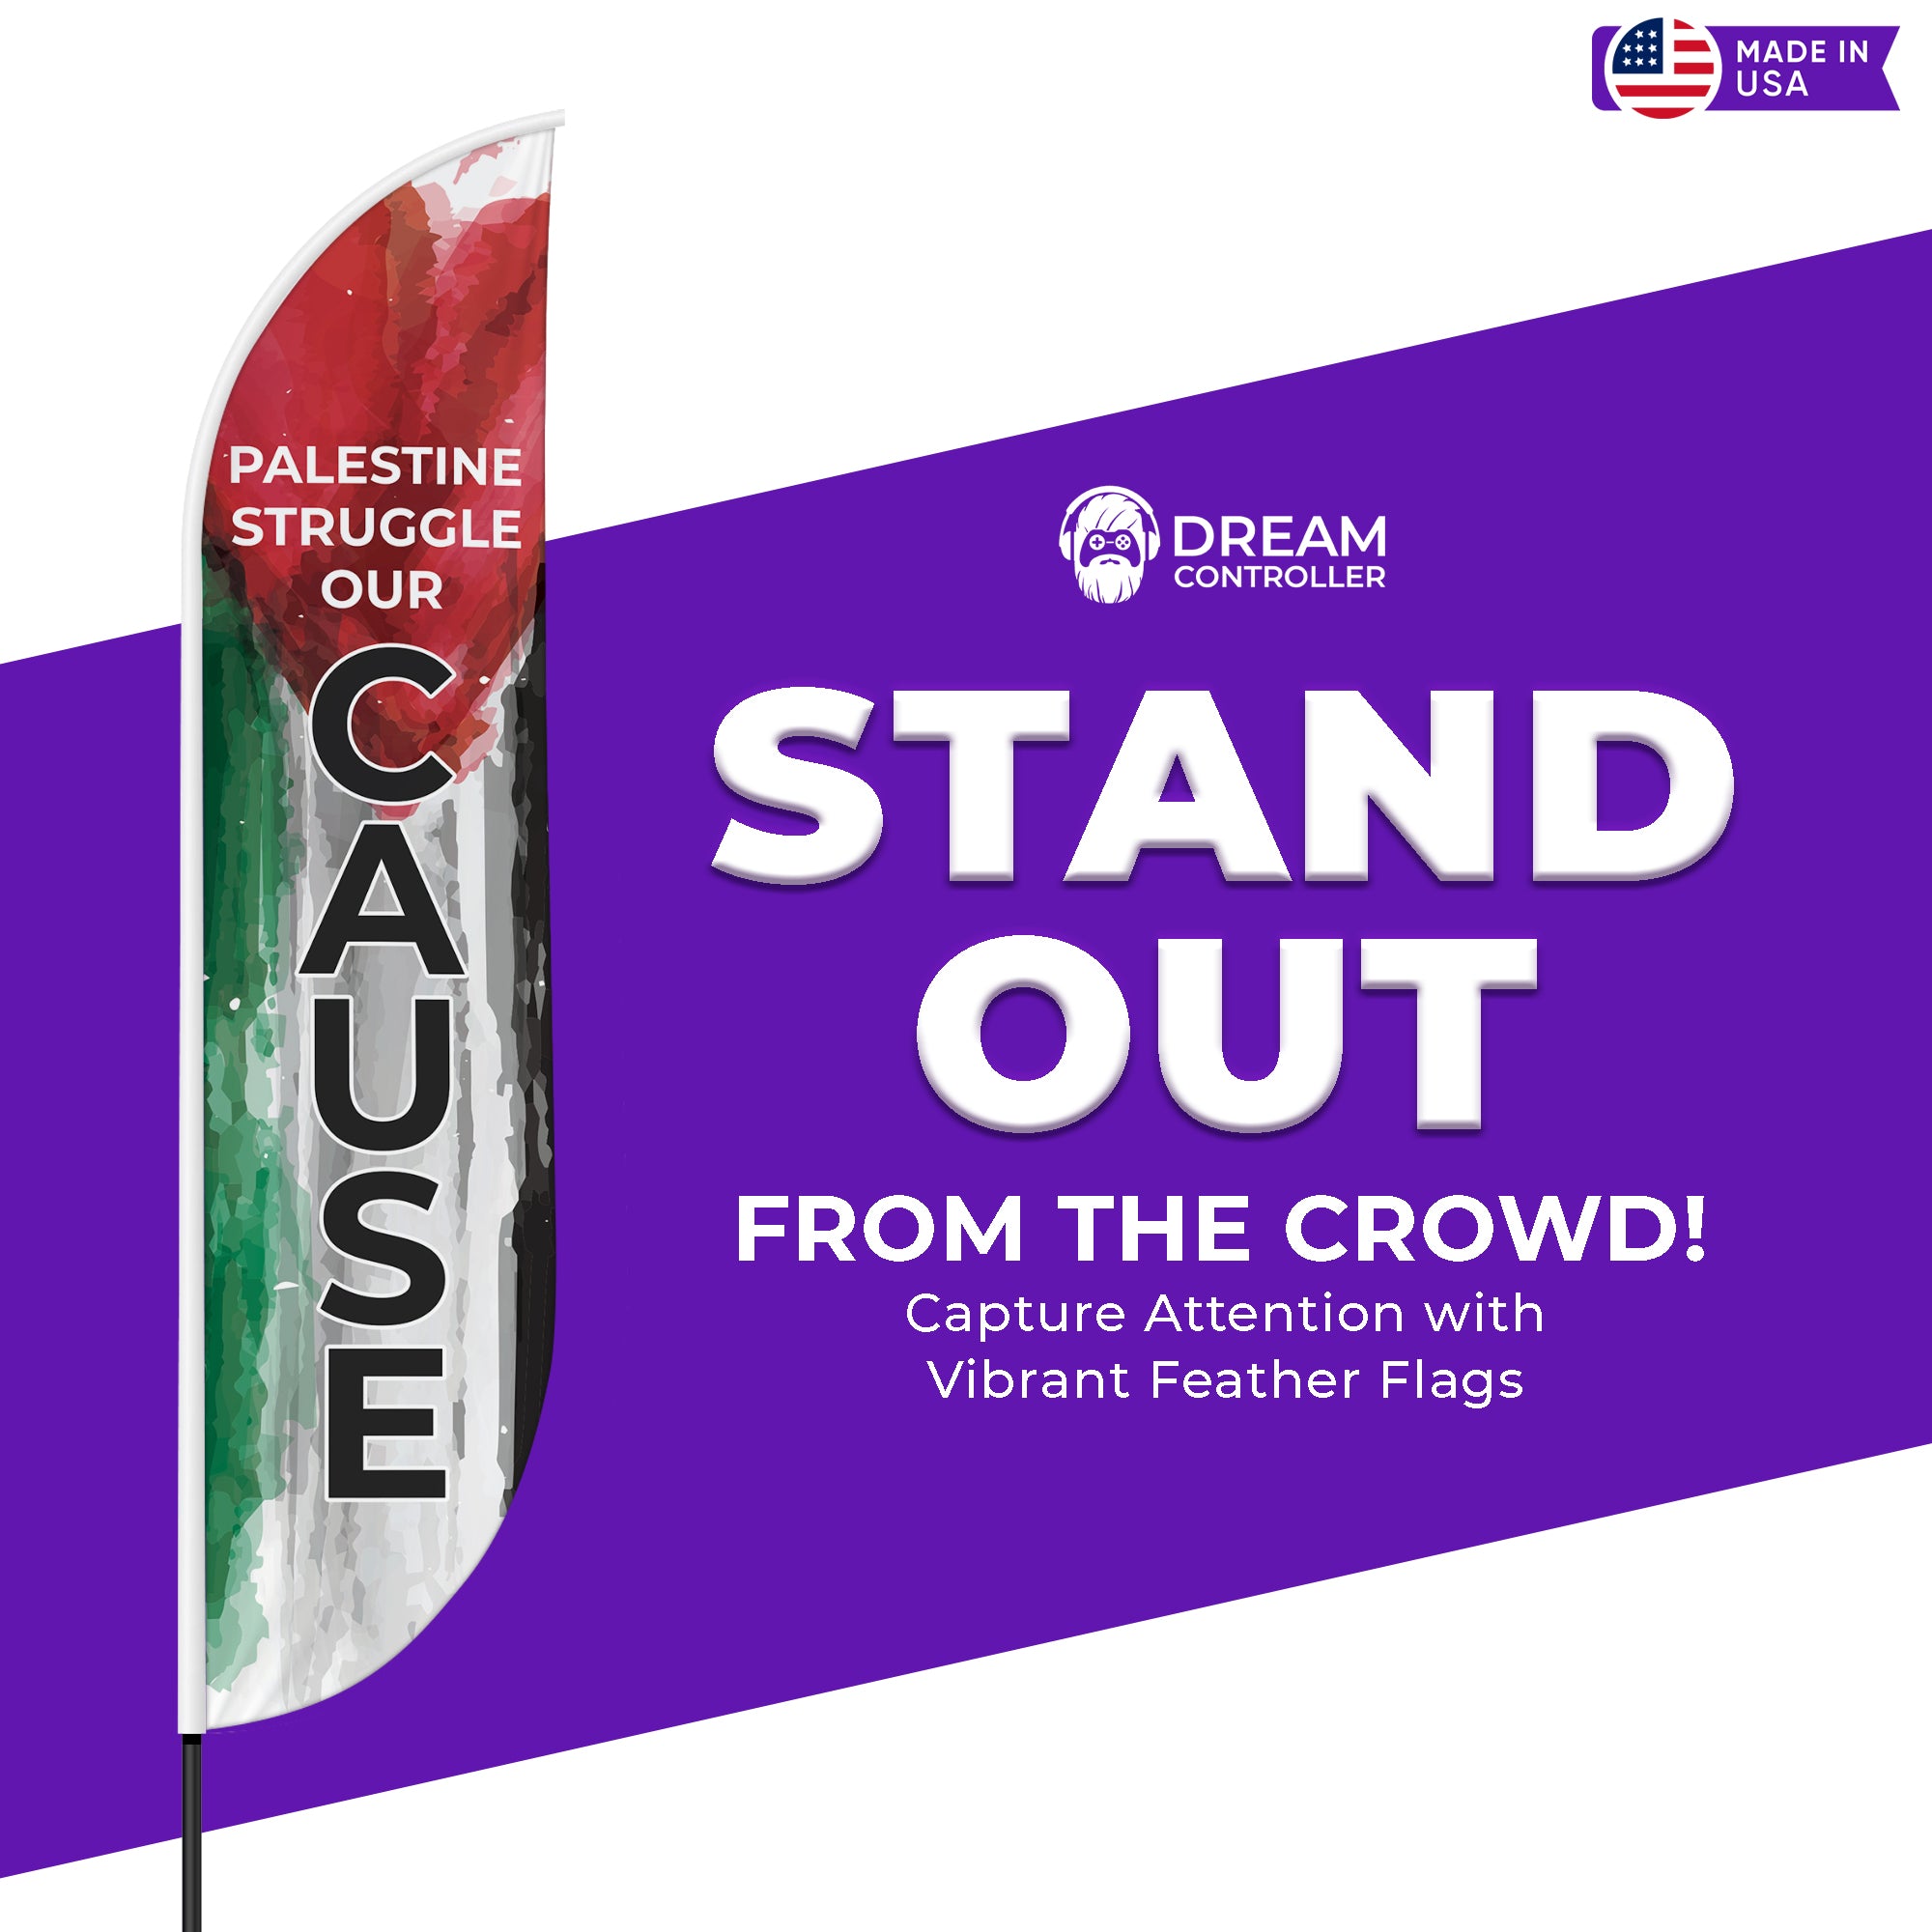 'Palestine's Struggle, Our Cause' Feather Flag – Premium Quality and Versatility